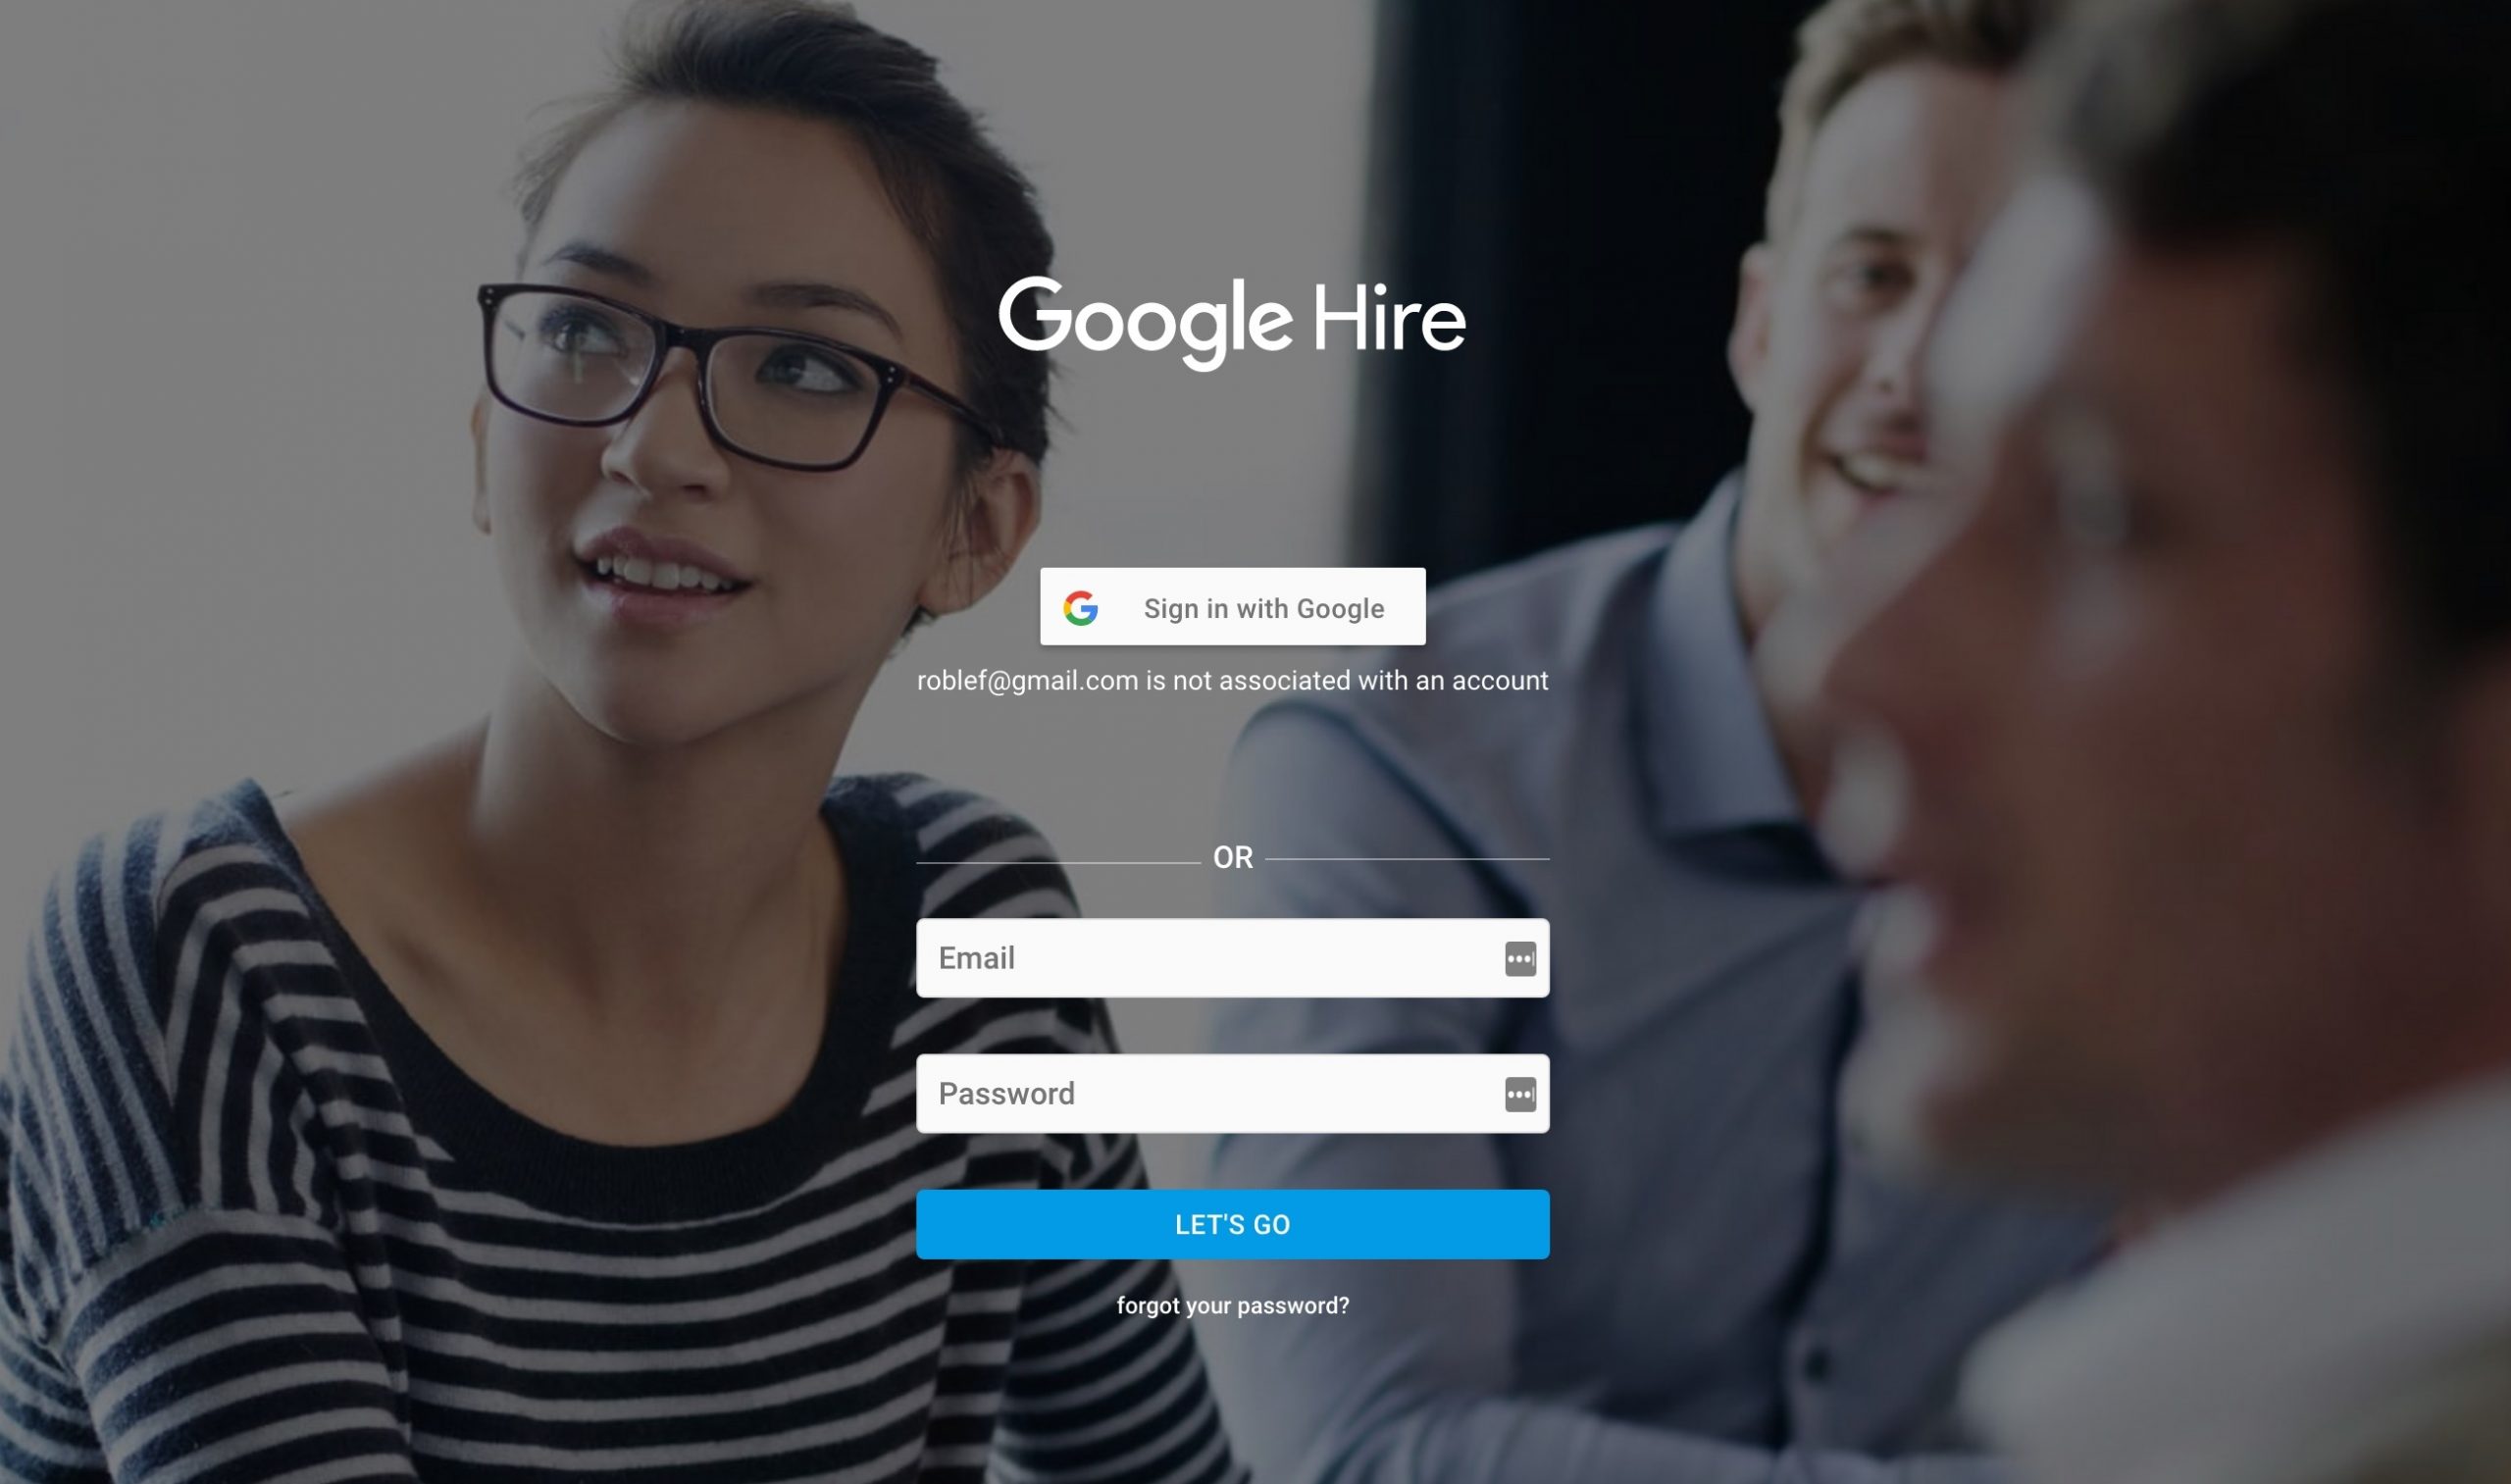 What is Google Hire, and why would recruiters use it?